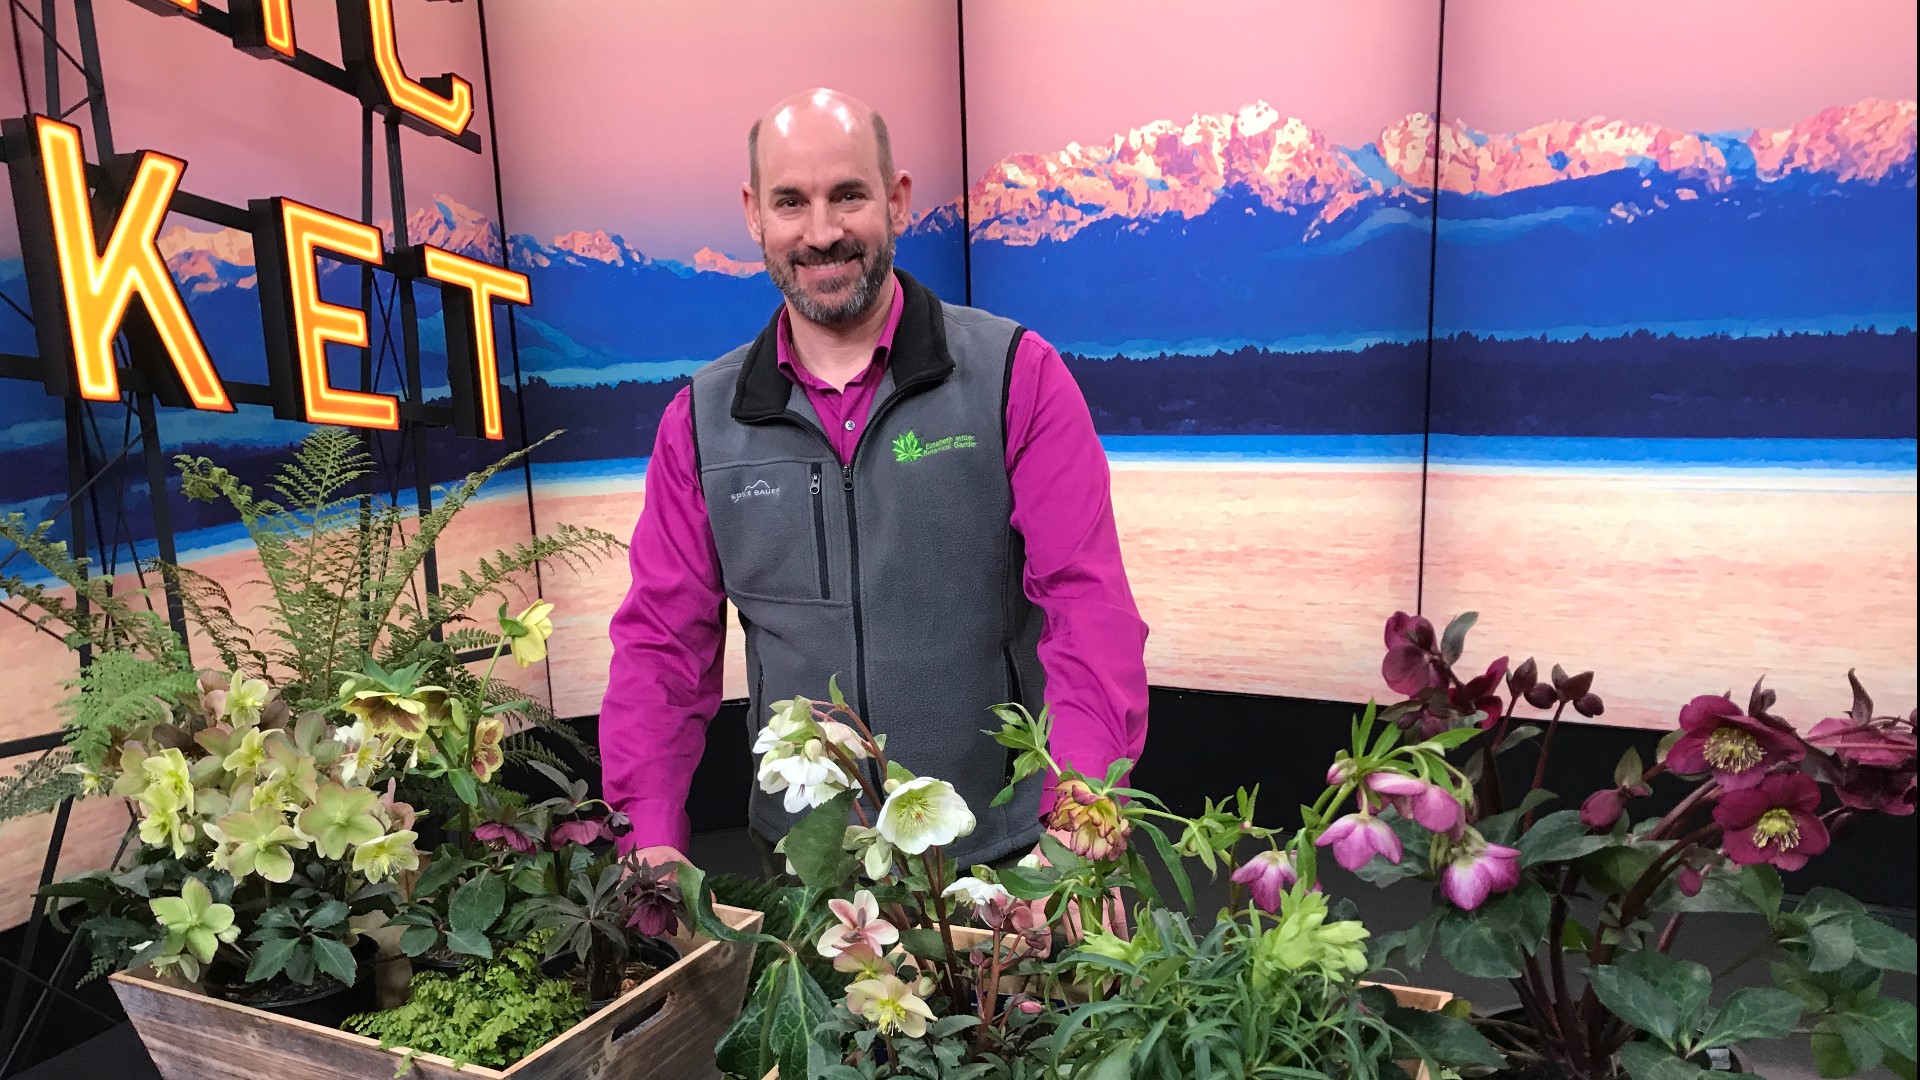 Gardening guru Richie Steffen shares tips for selecting native botanicals, drought-tolerant, and pollinator-friendly plants. Sponsored by NW Flower & Garden Festival